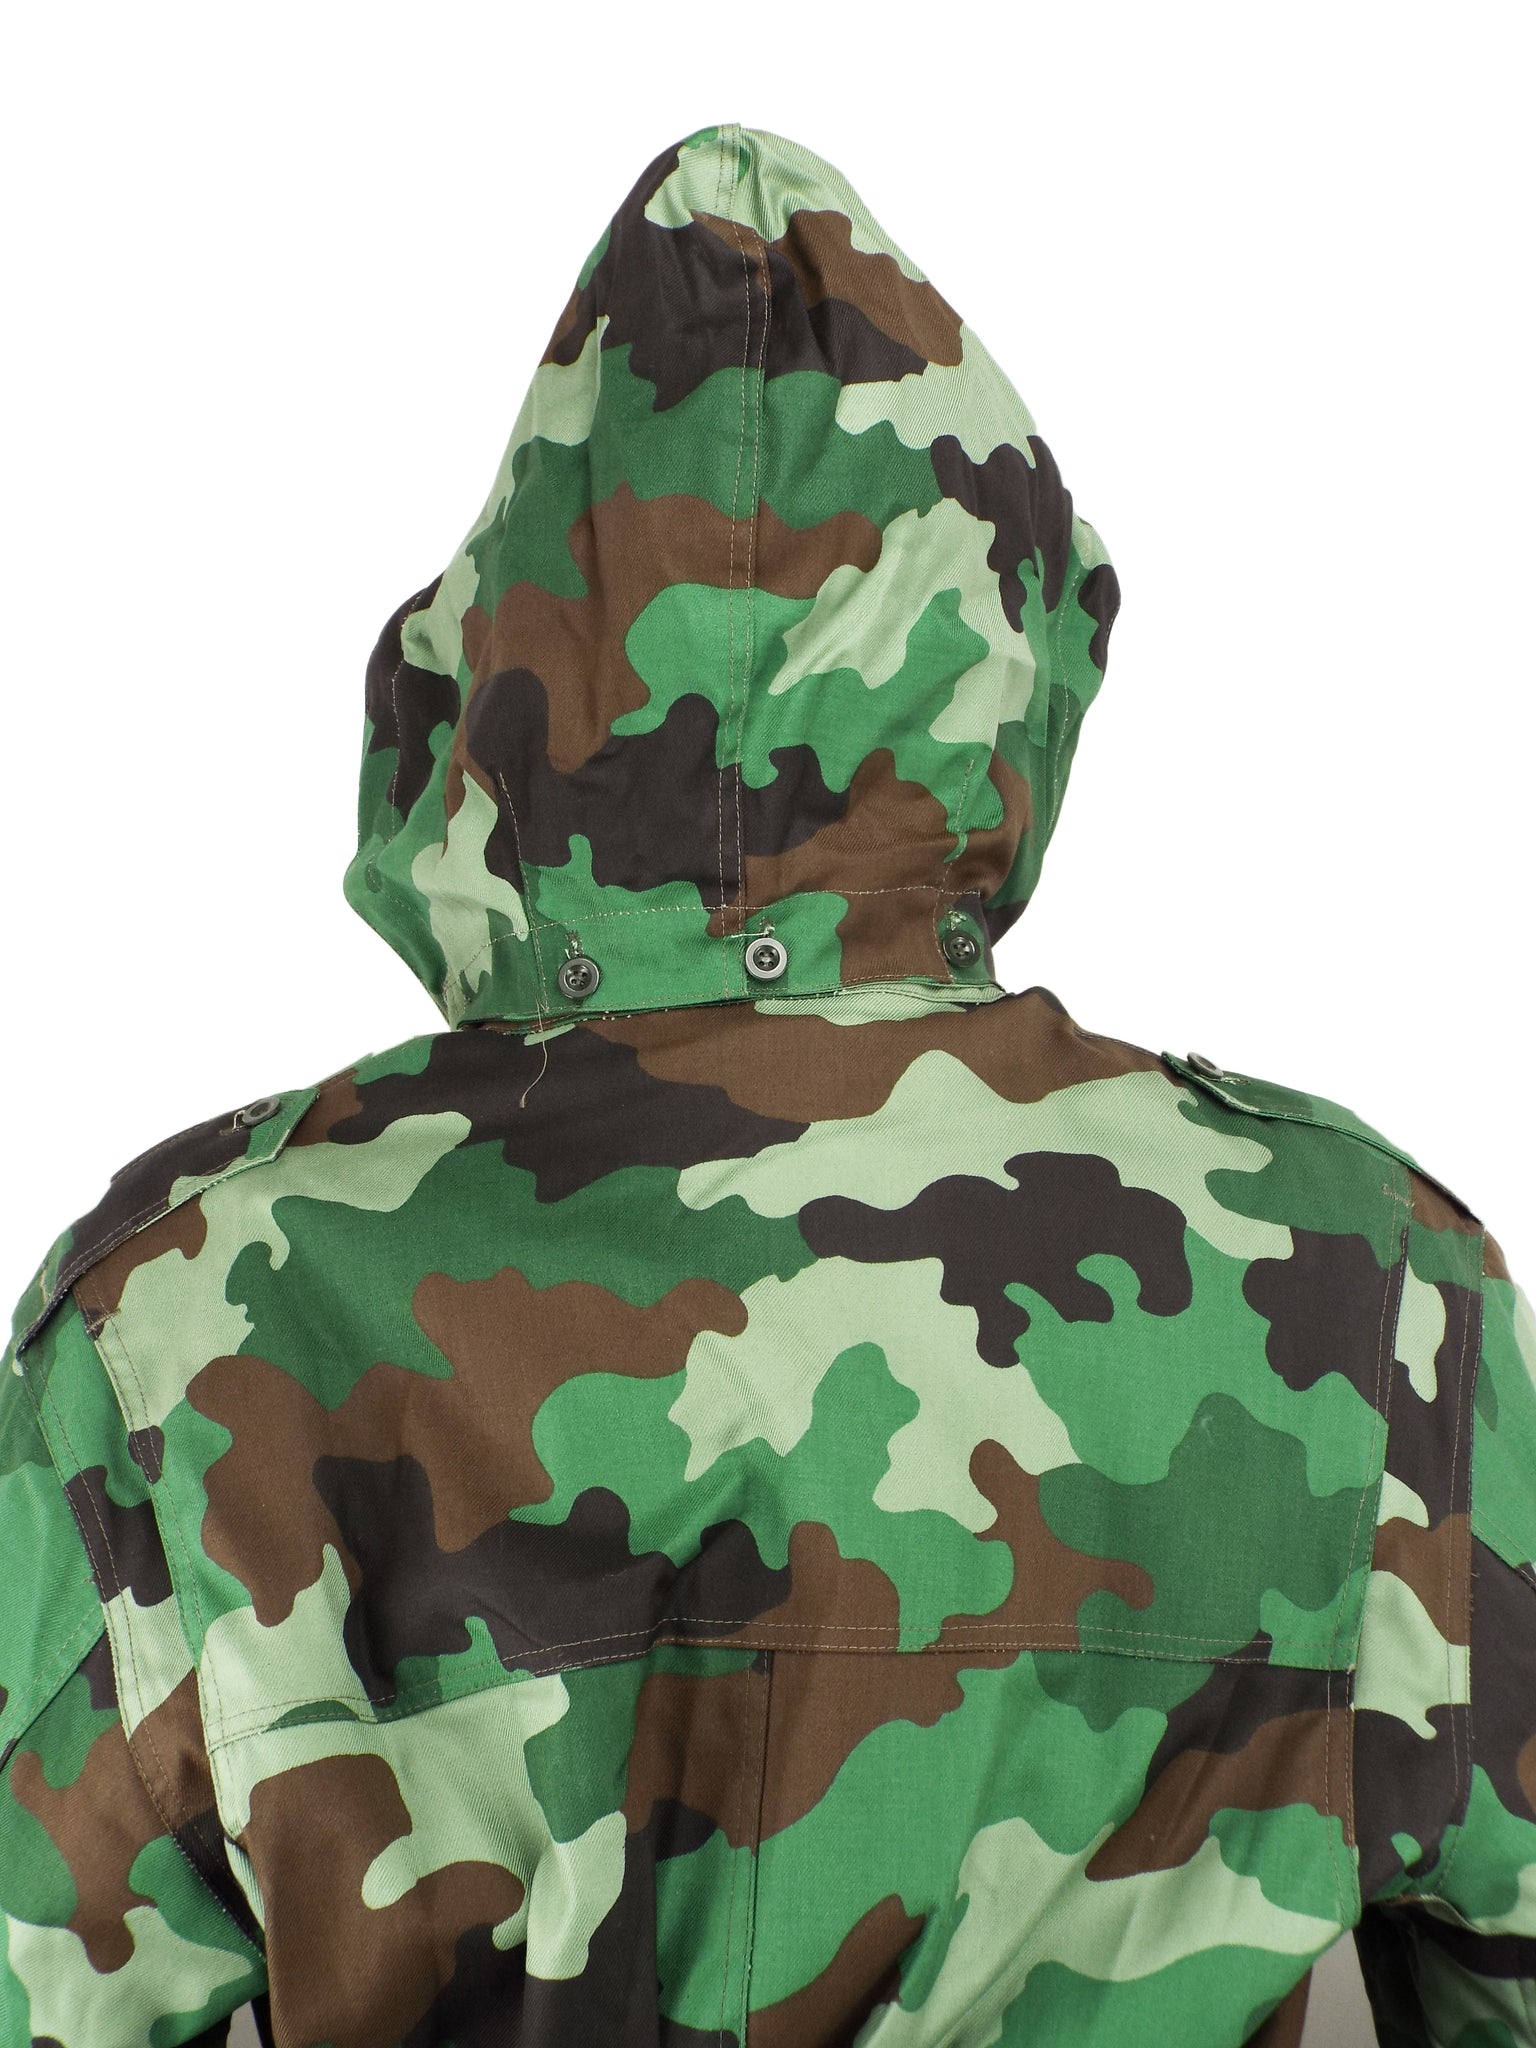 Serbian Camouflage Parka - New | Forces Uniform and Kit